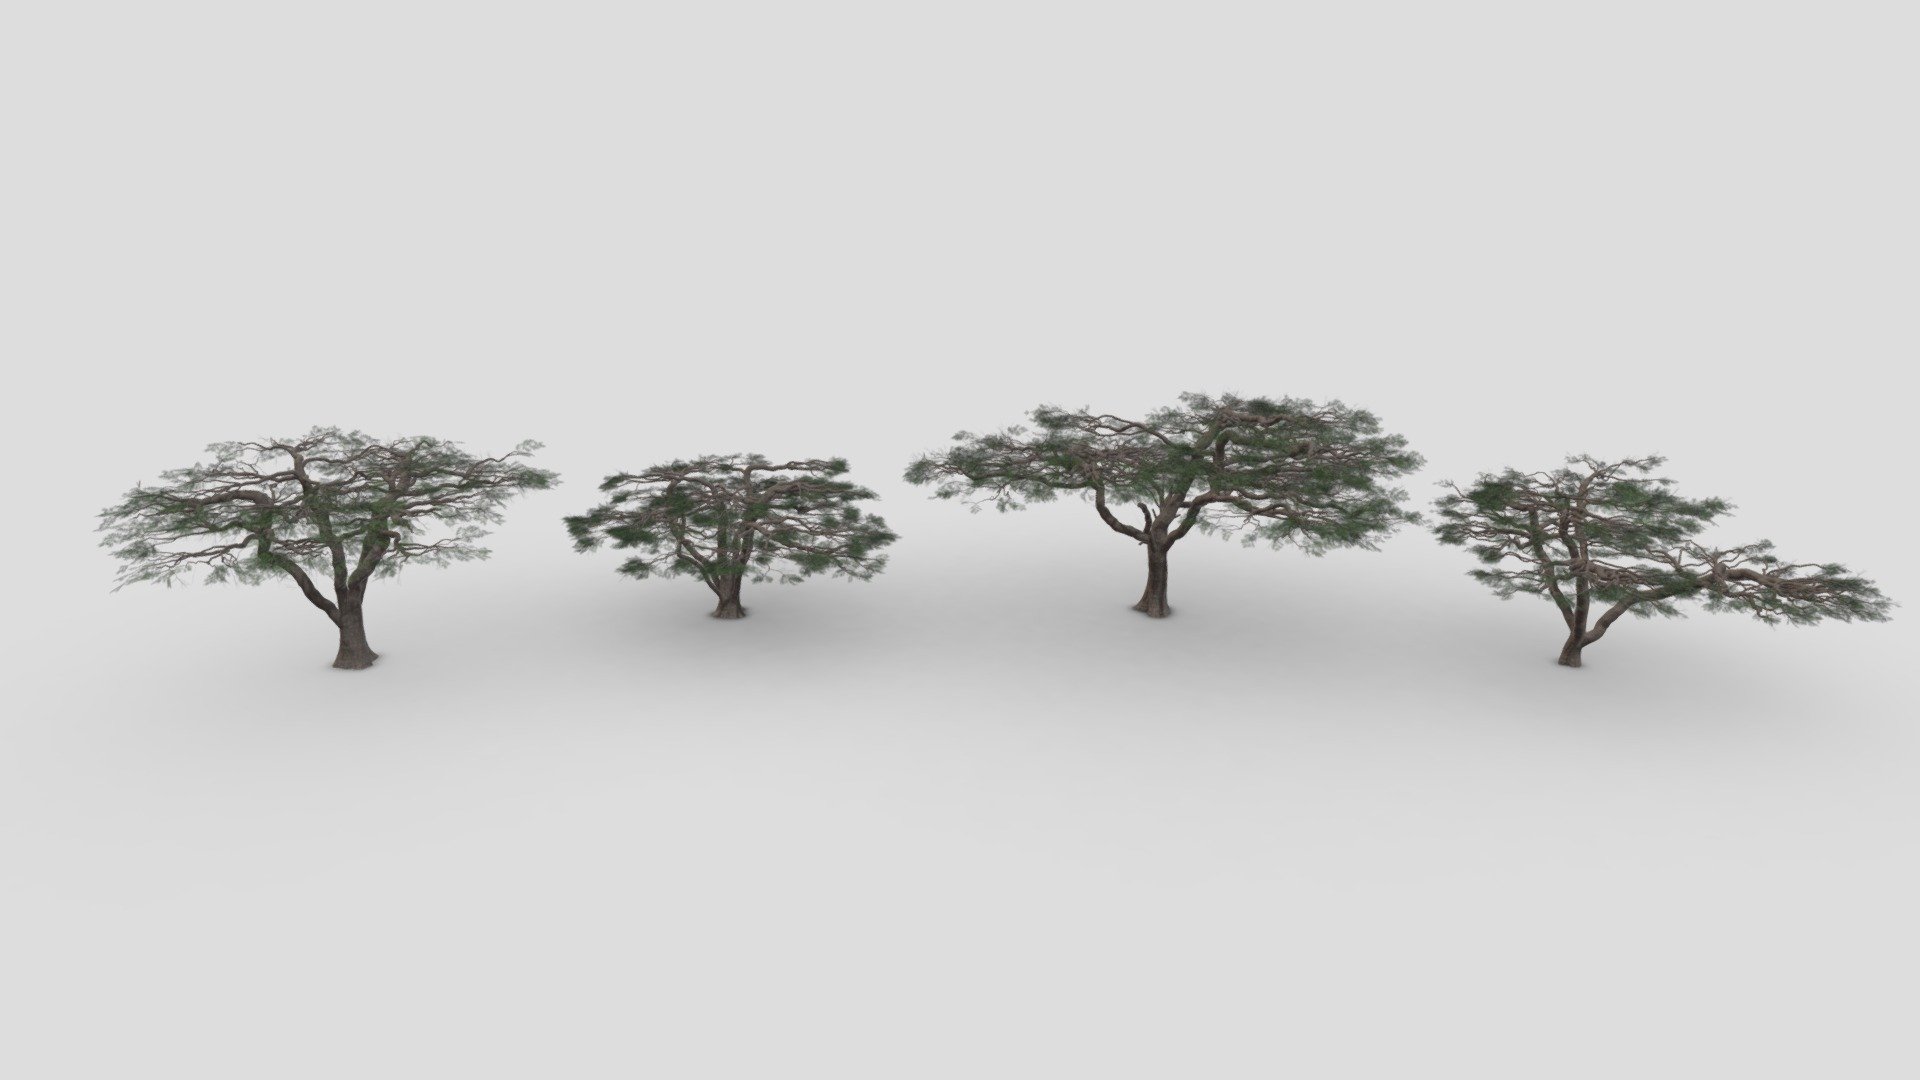 This pack contains 4 3D low poly models of African Acacia Tree 3d model